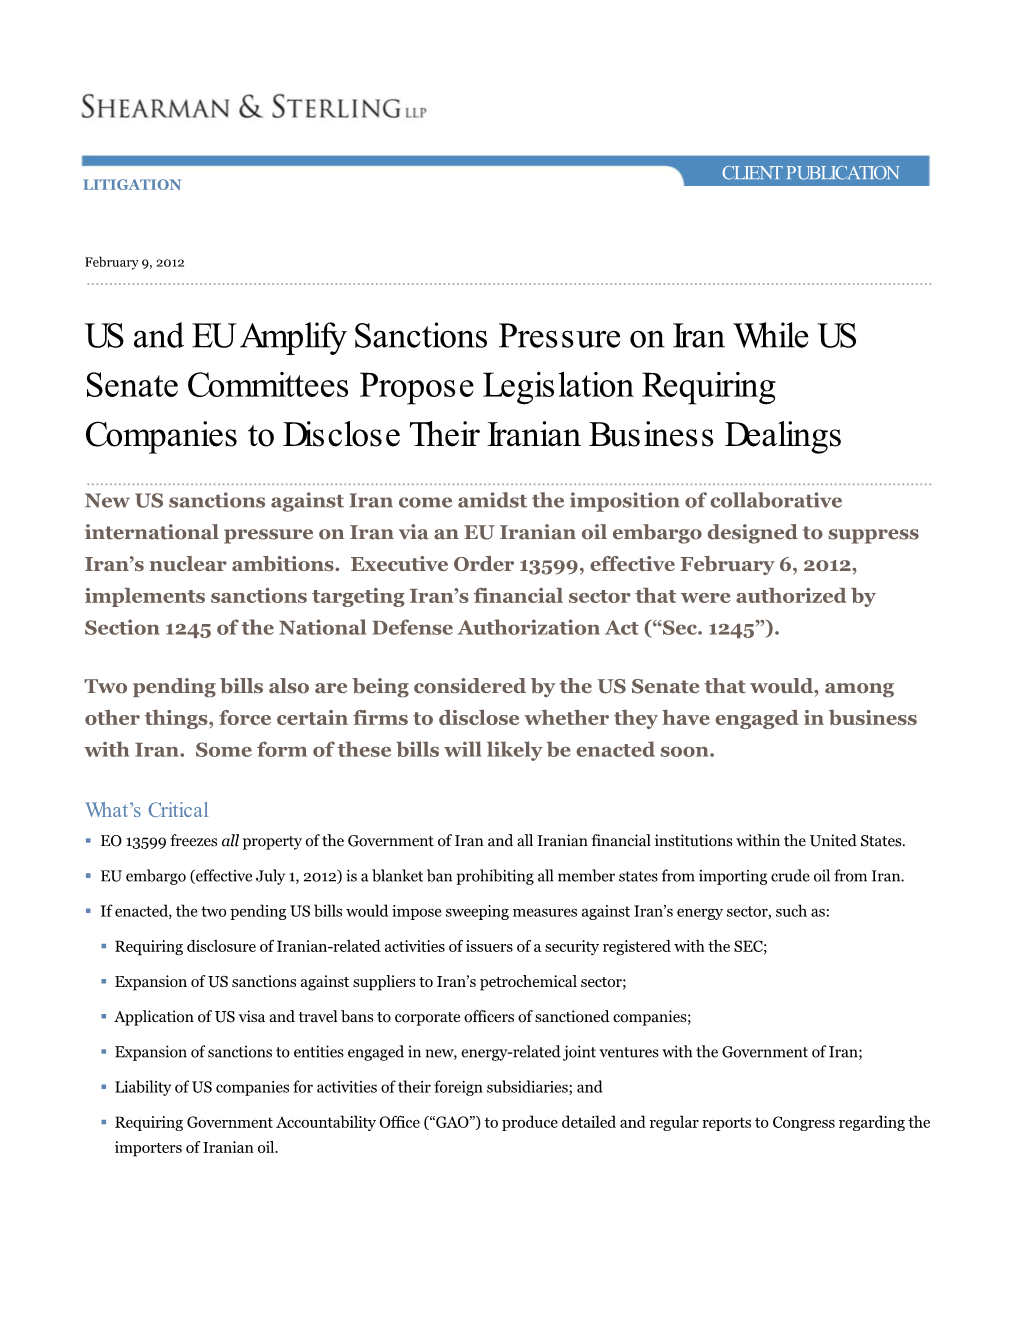 US and EU Amplify Sanctions Pressure on Iran While US Senate Committees Propose Legislation Requiring Companies to Disclose Their Iranian Business Dealings